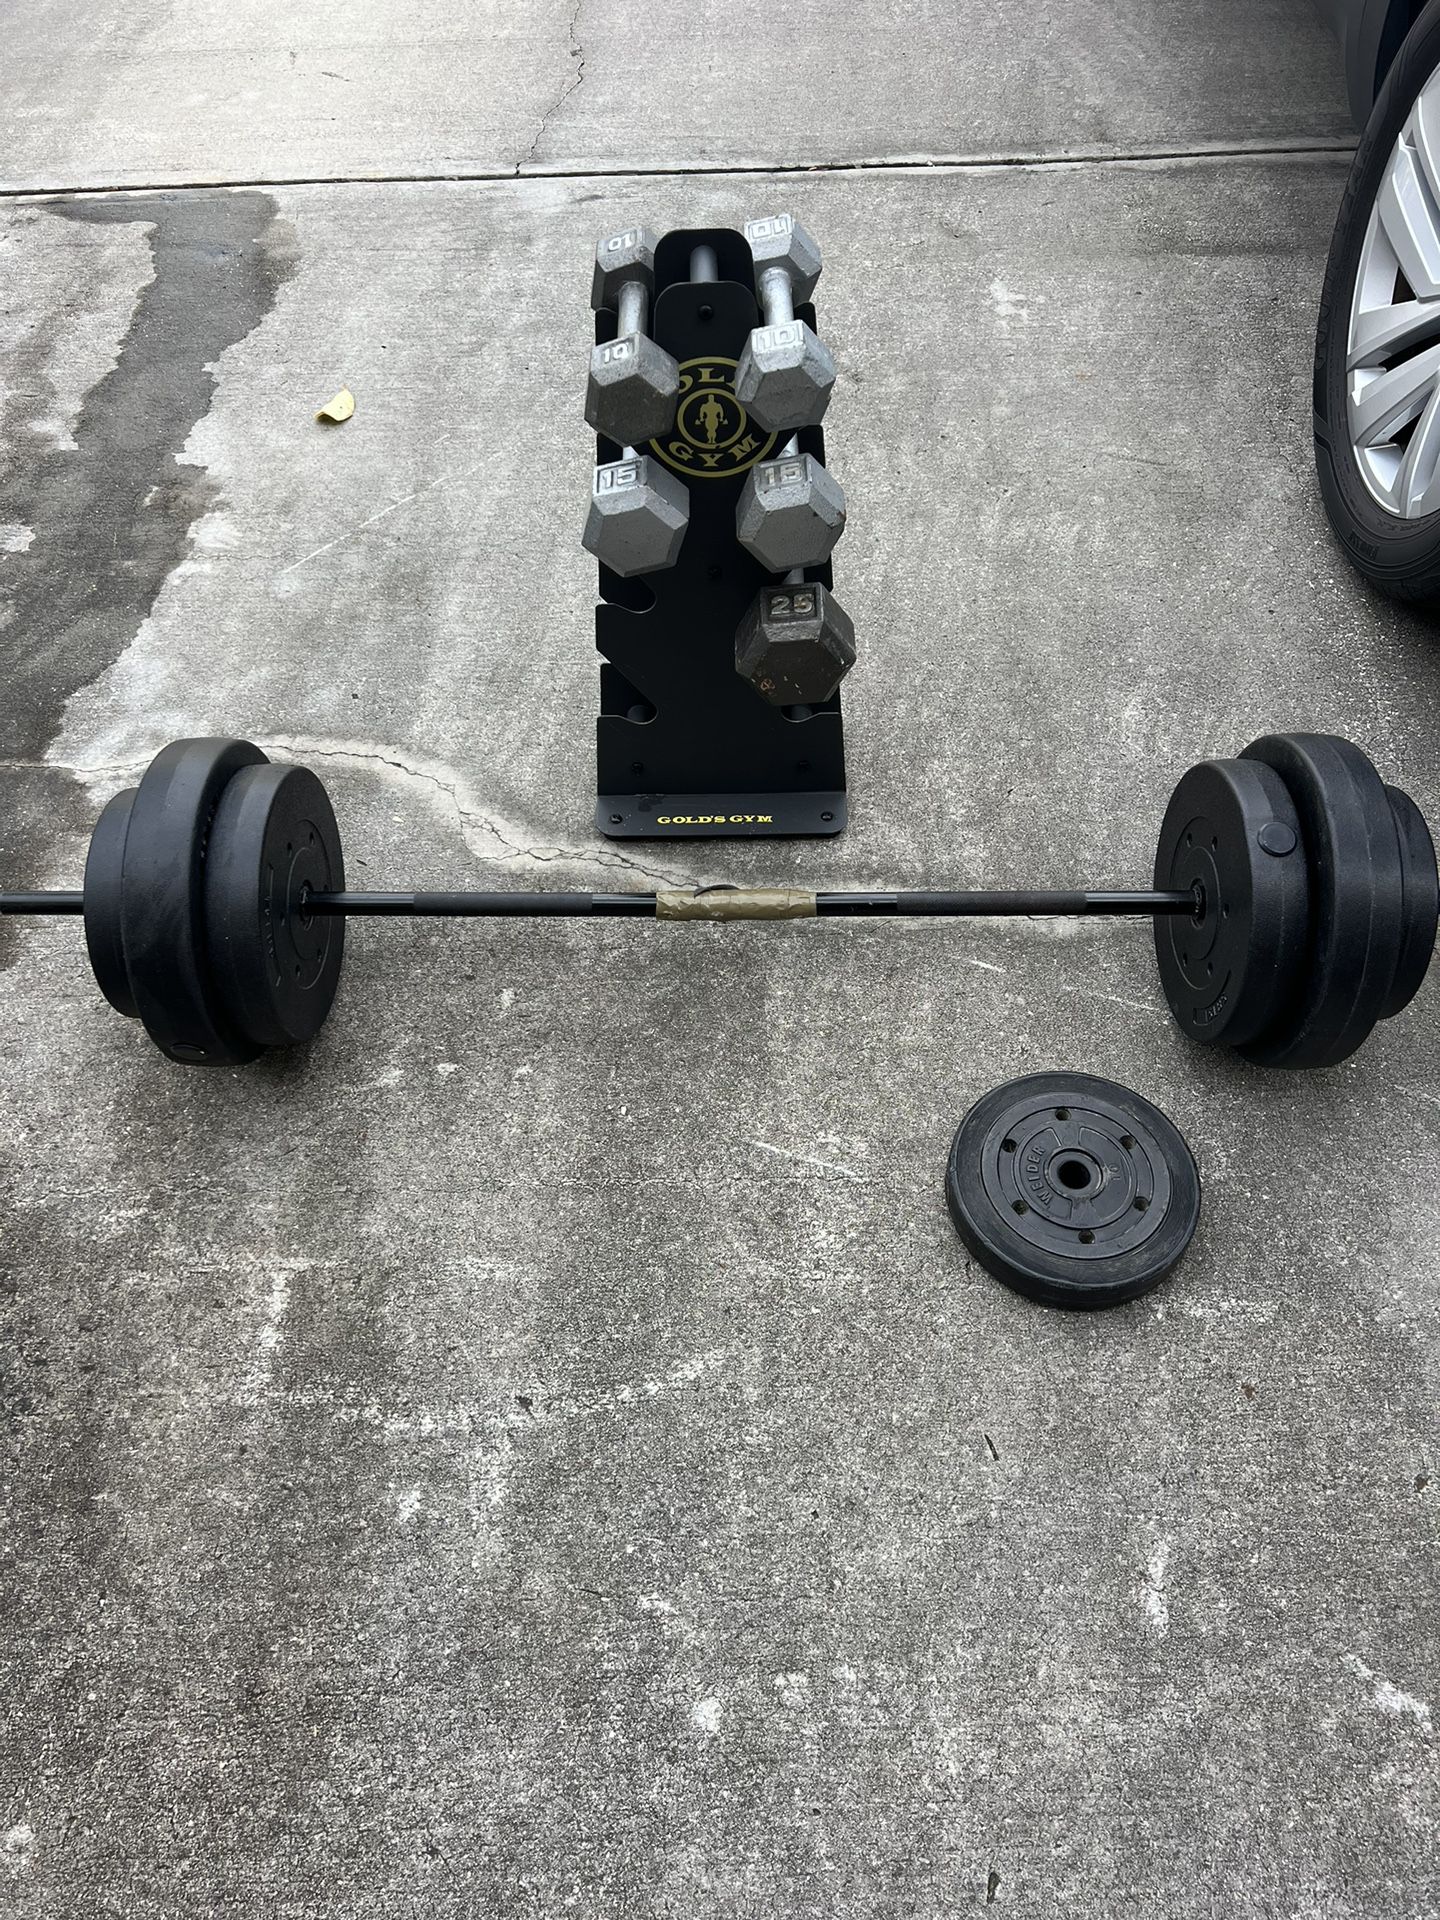 Gold’s Gym Rack With Dumbbells Bar And Weights